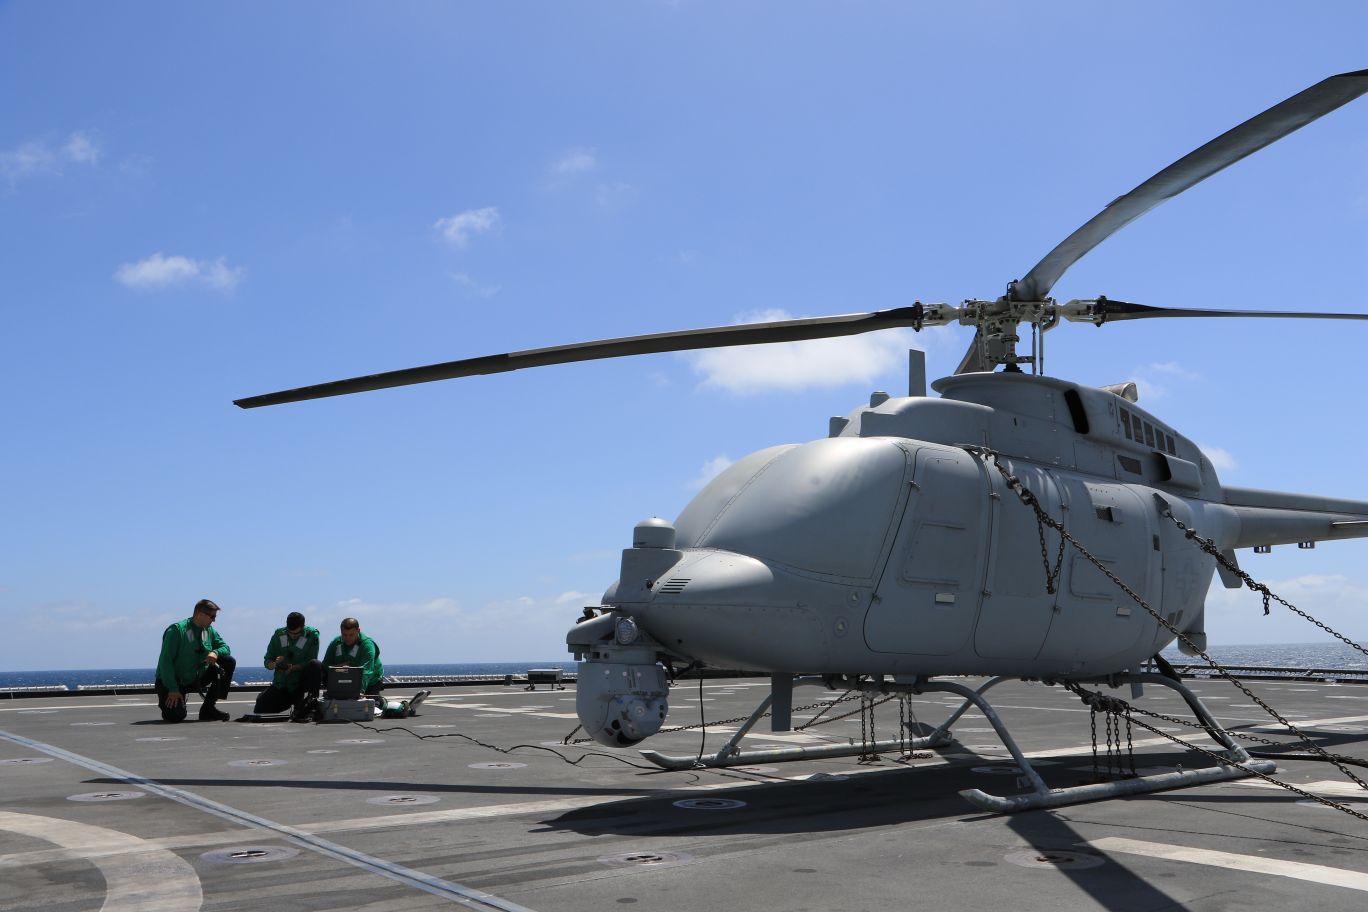 The MQ-8C Fire Scout seen on the flight deck of the Independence variant littoral combat ship USS Coronado (LCS 4) on 21 June 2018. The MQ-8C features a 30% increase in top airspeed over the MQ-8B. (US Navy)